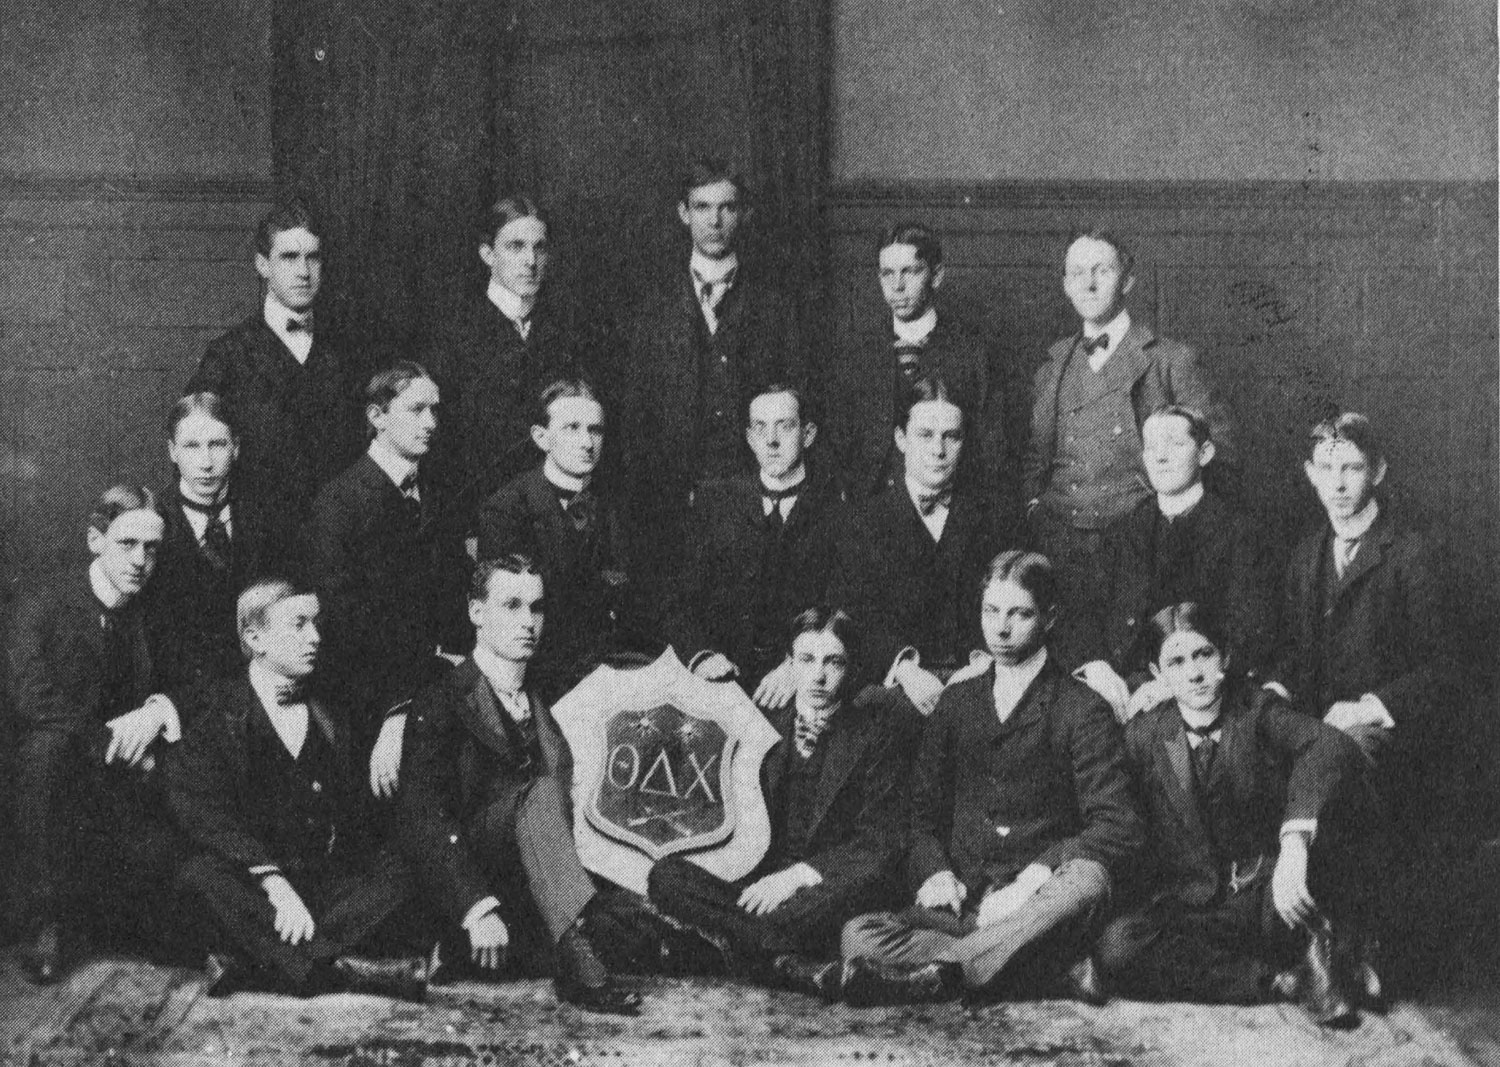 A photograph of seventeen young men standing and seated around a heraldic shield 
                    containing the Greek letters Theta, Delta, and Chi. They are dressed in dark 
                    jackets with ties. An older man in a lighter colored suit stands in the upper right.